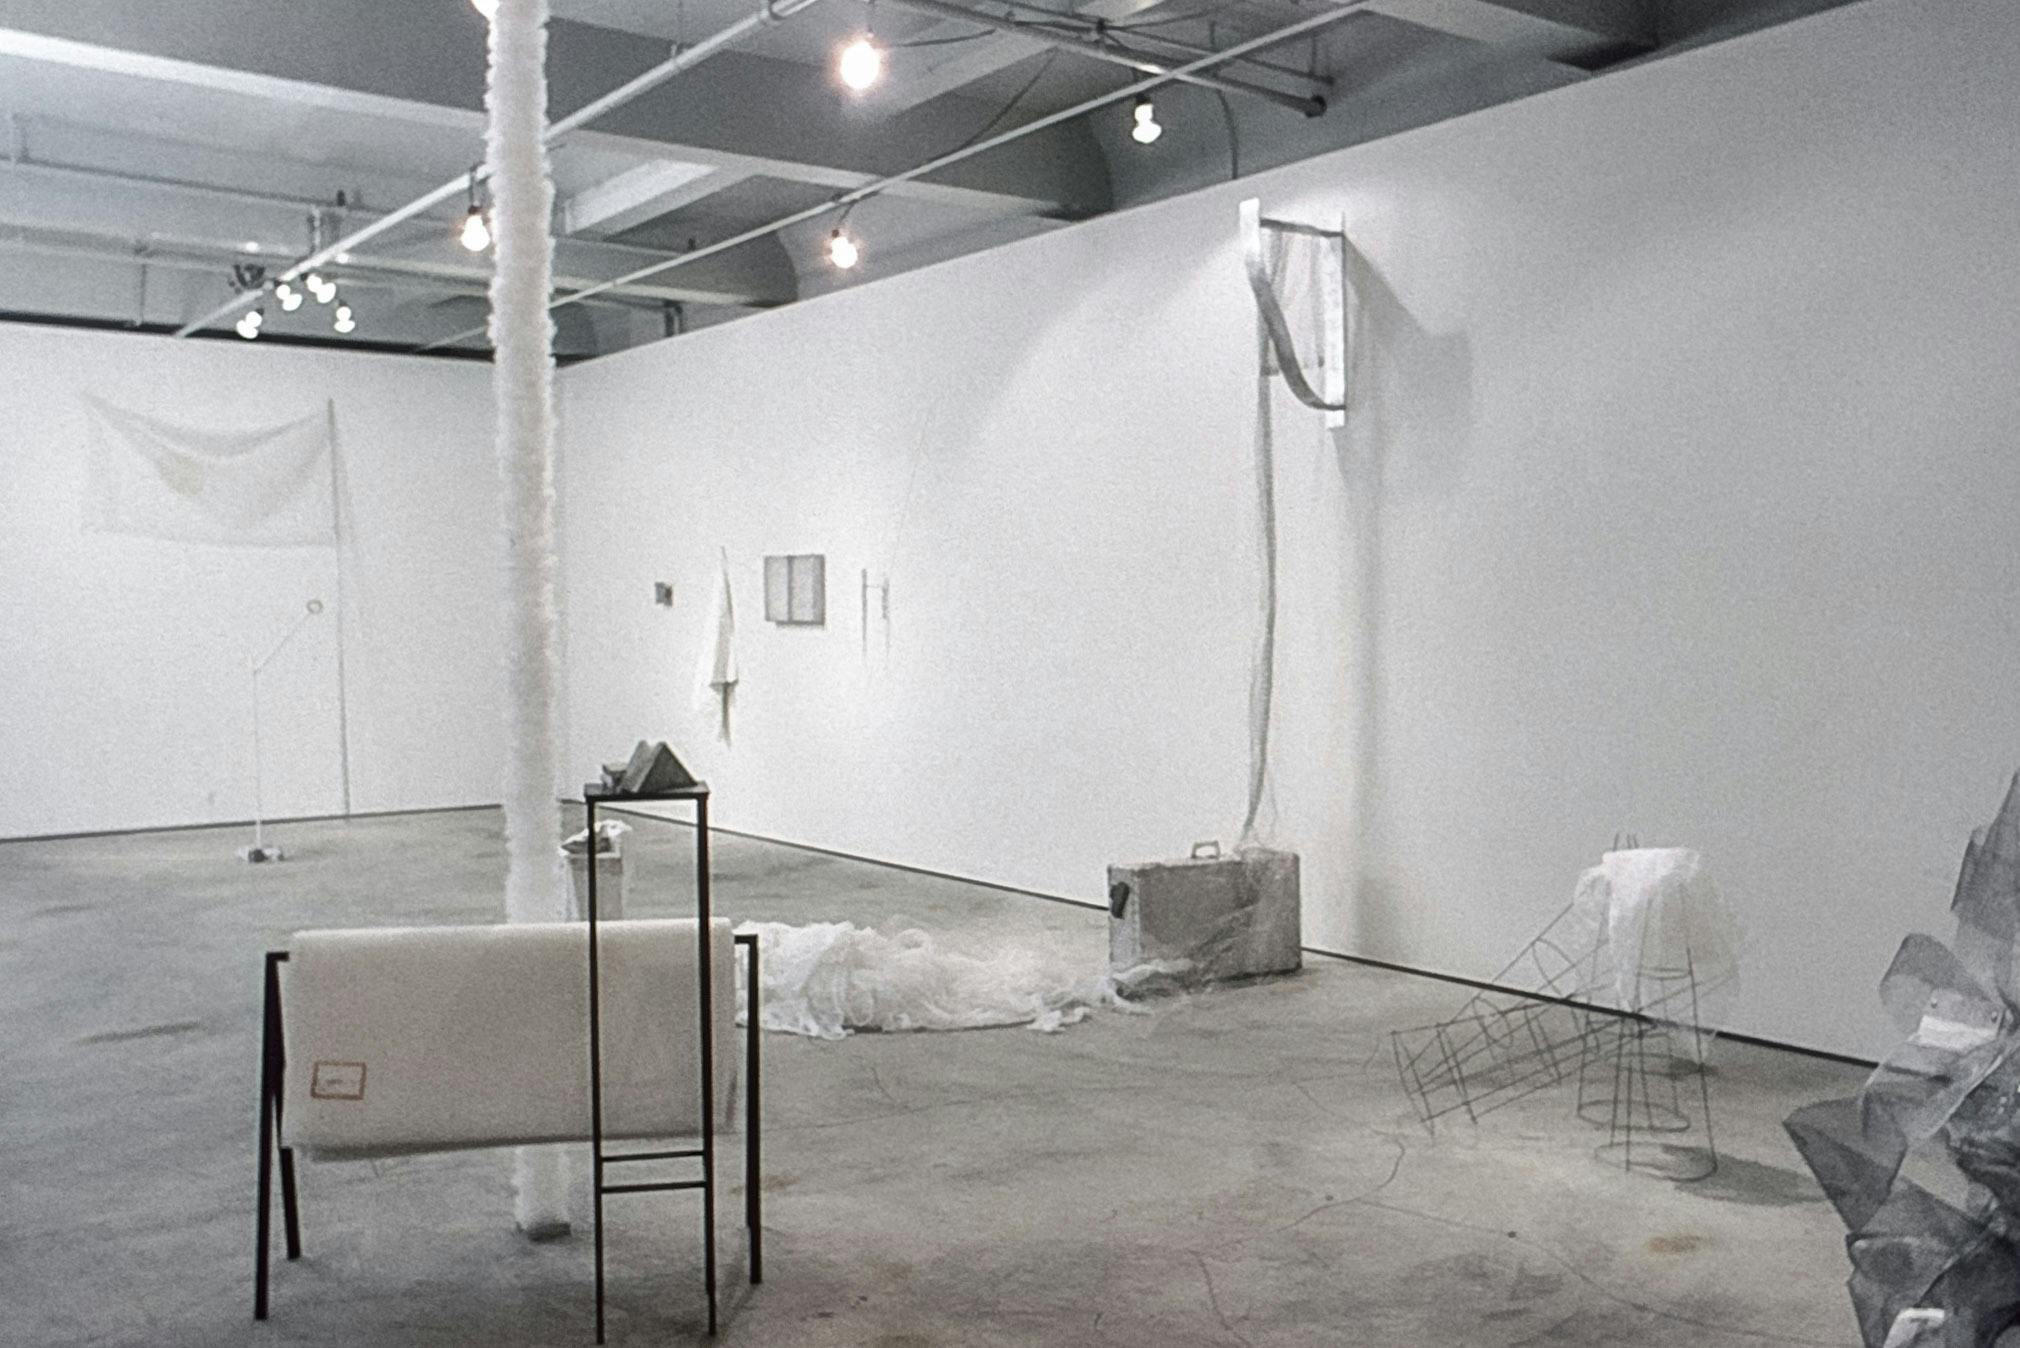 A gallery with several artworks placed all around. The works include a white, textured tube shape hanging from the ceiling to the floor, and a mound of sheer white fabric on the floor. 